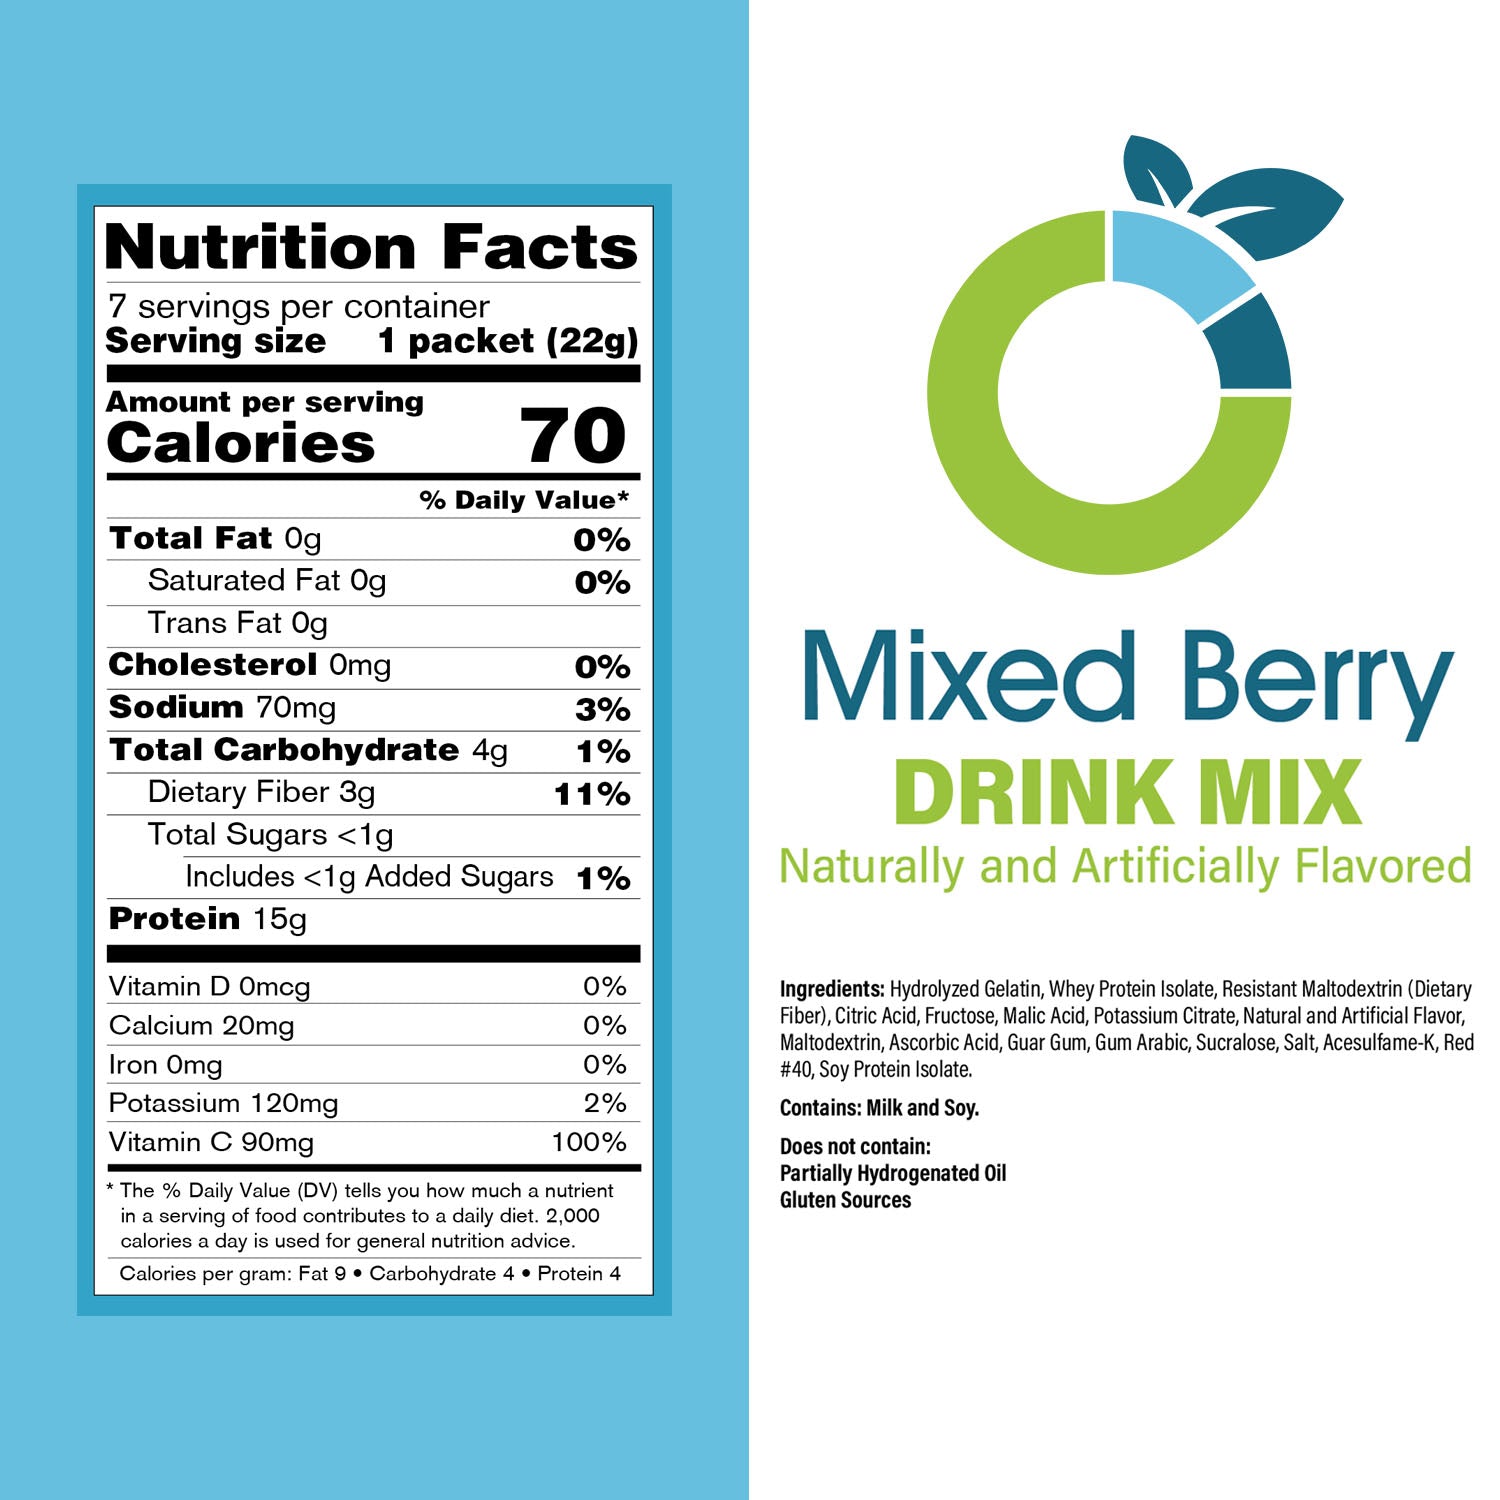 Mixed Berry Drink Mix